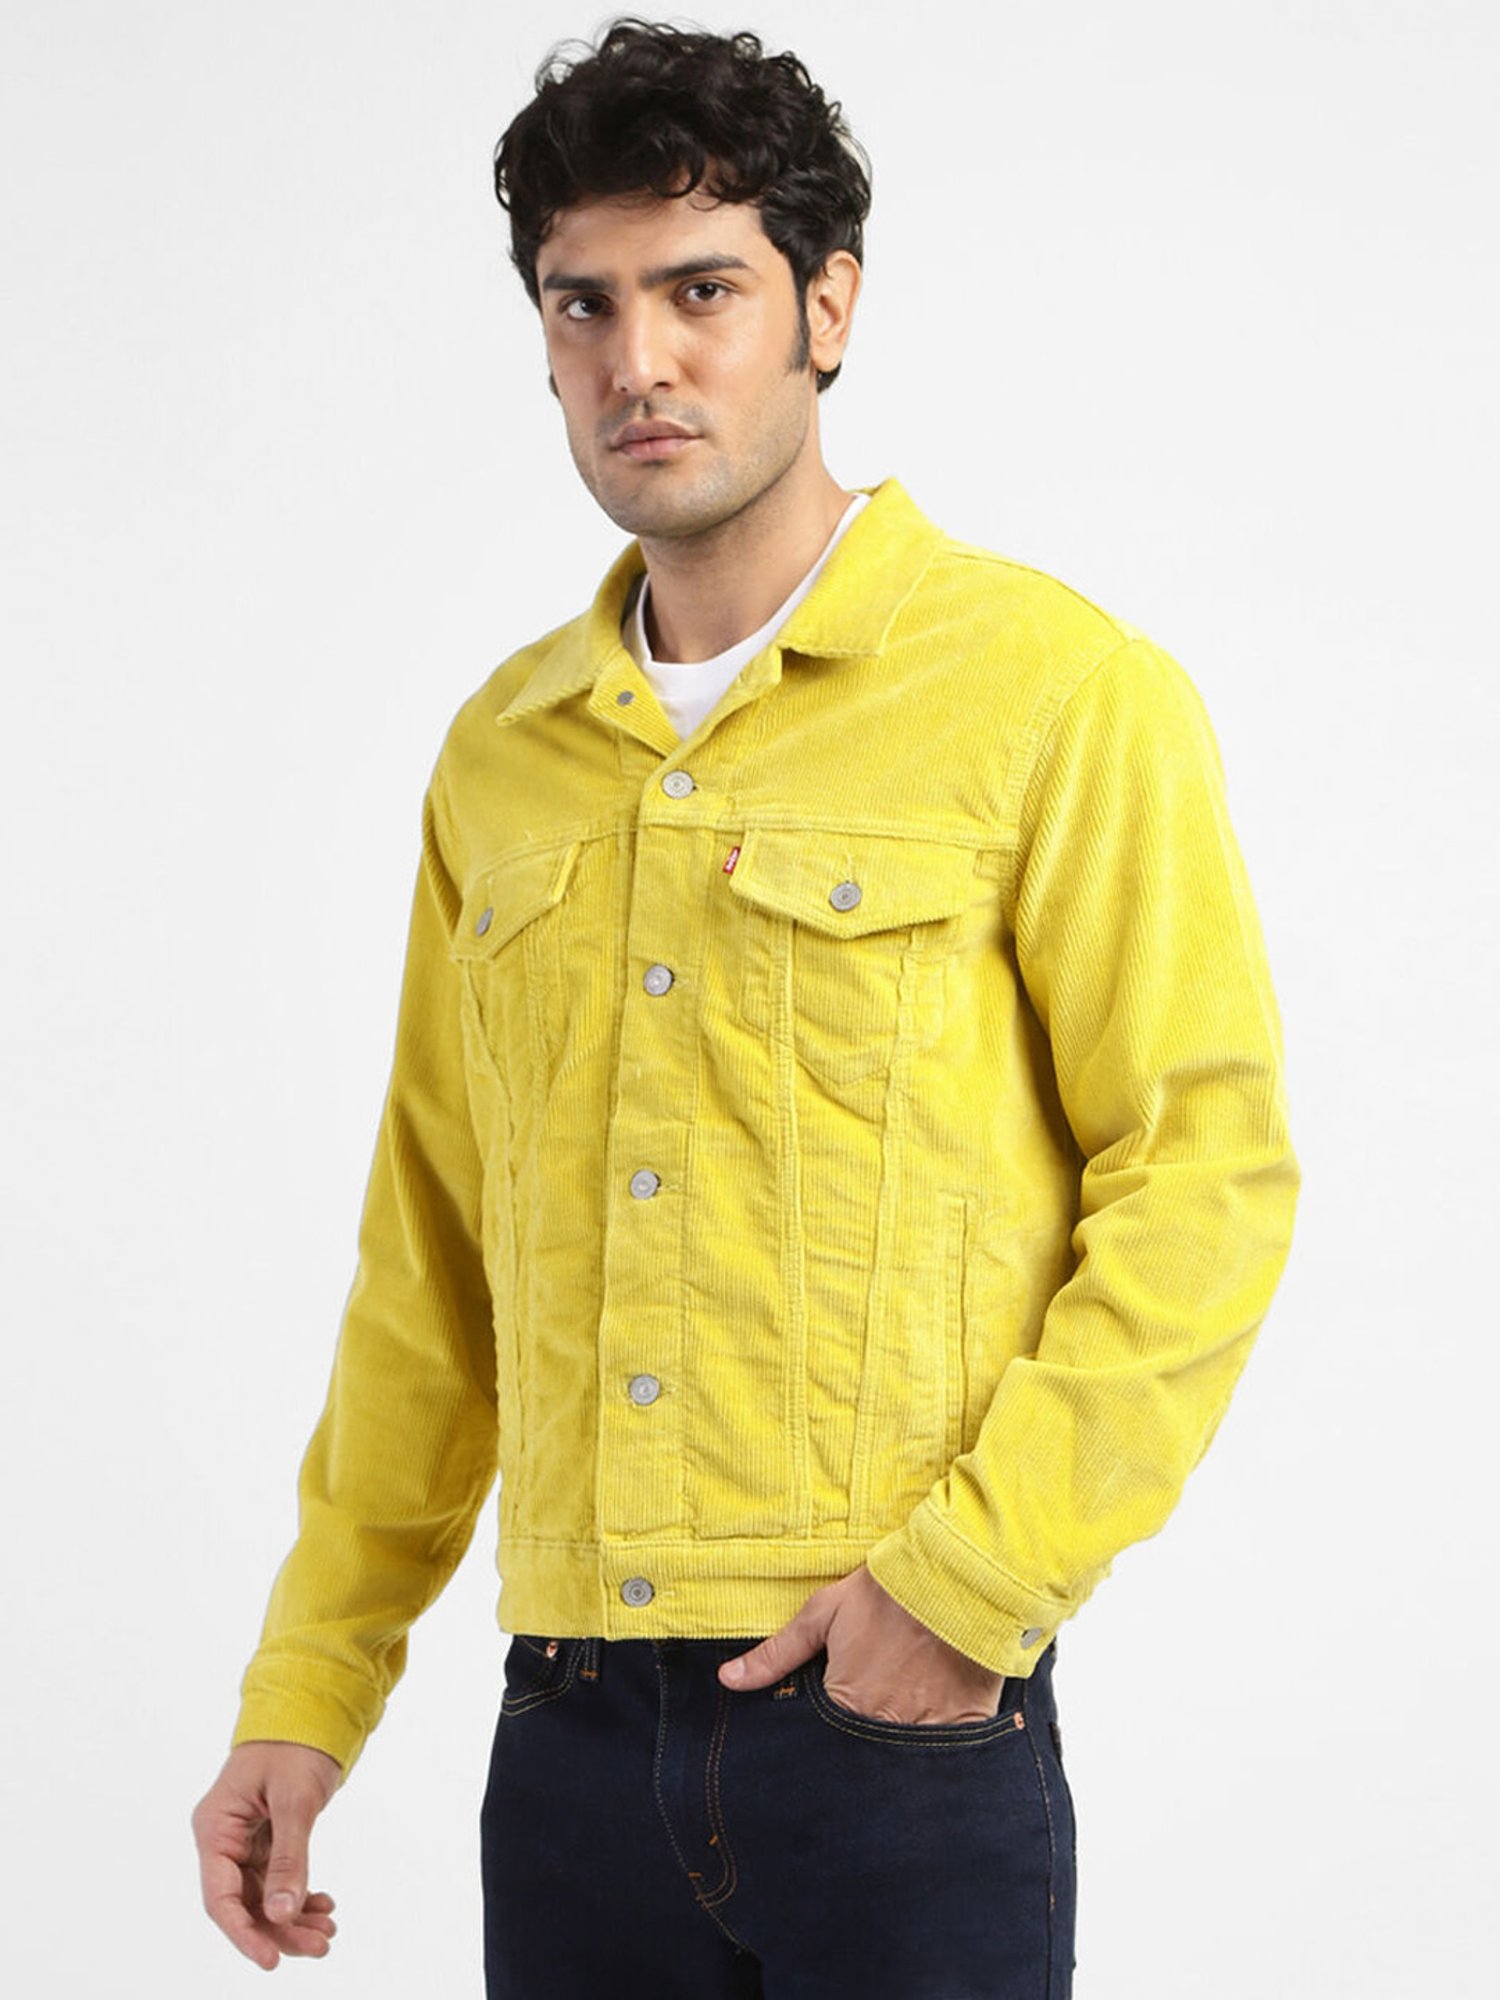 Mustard Jacket Outfits For Men (493 ideas & outfits) | Lookastic